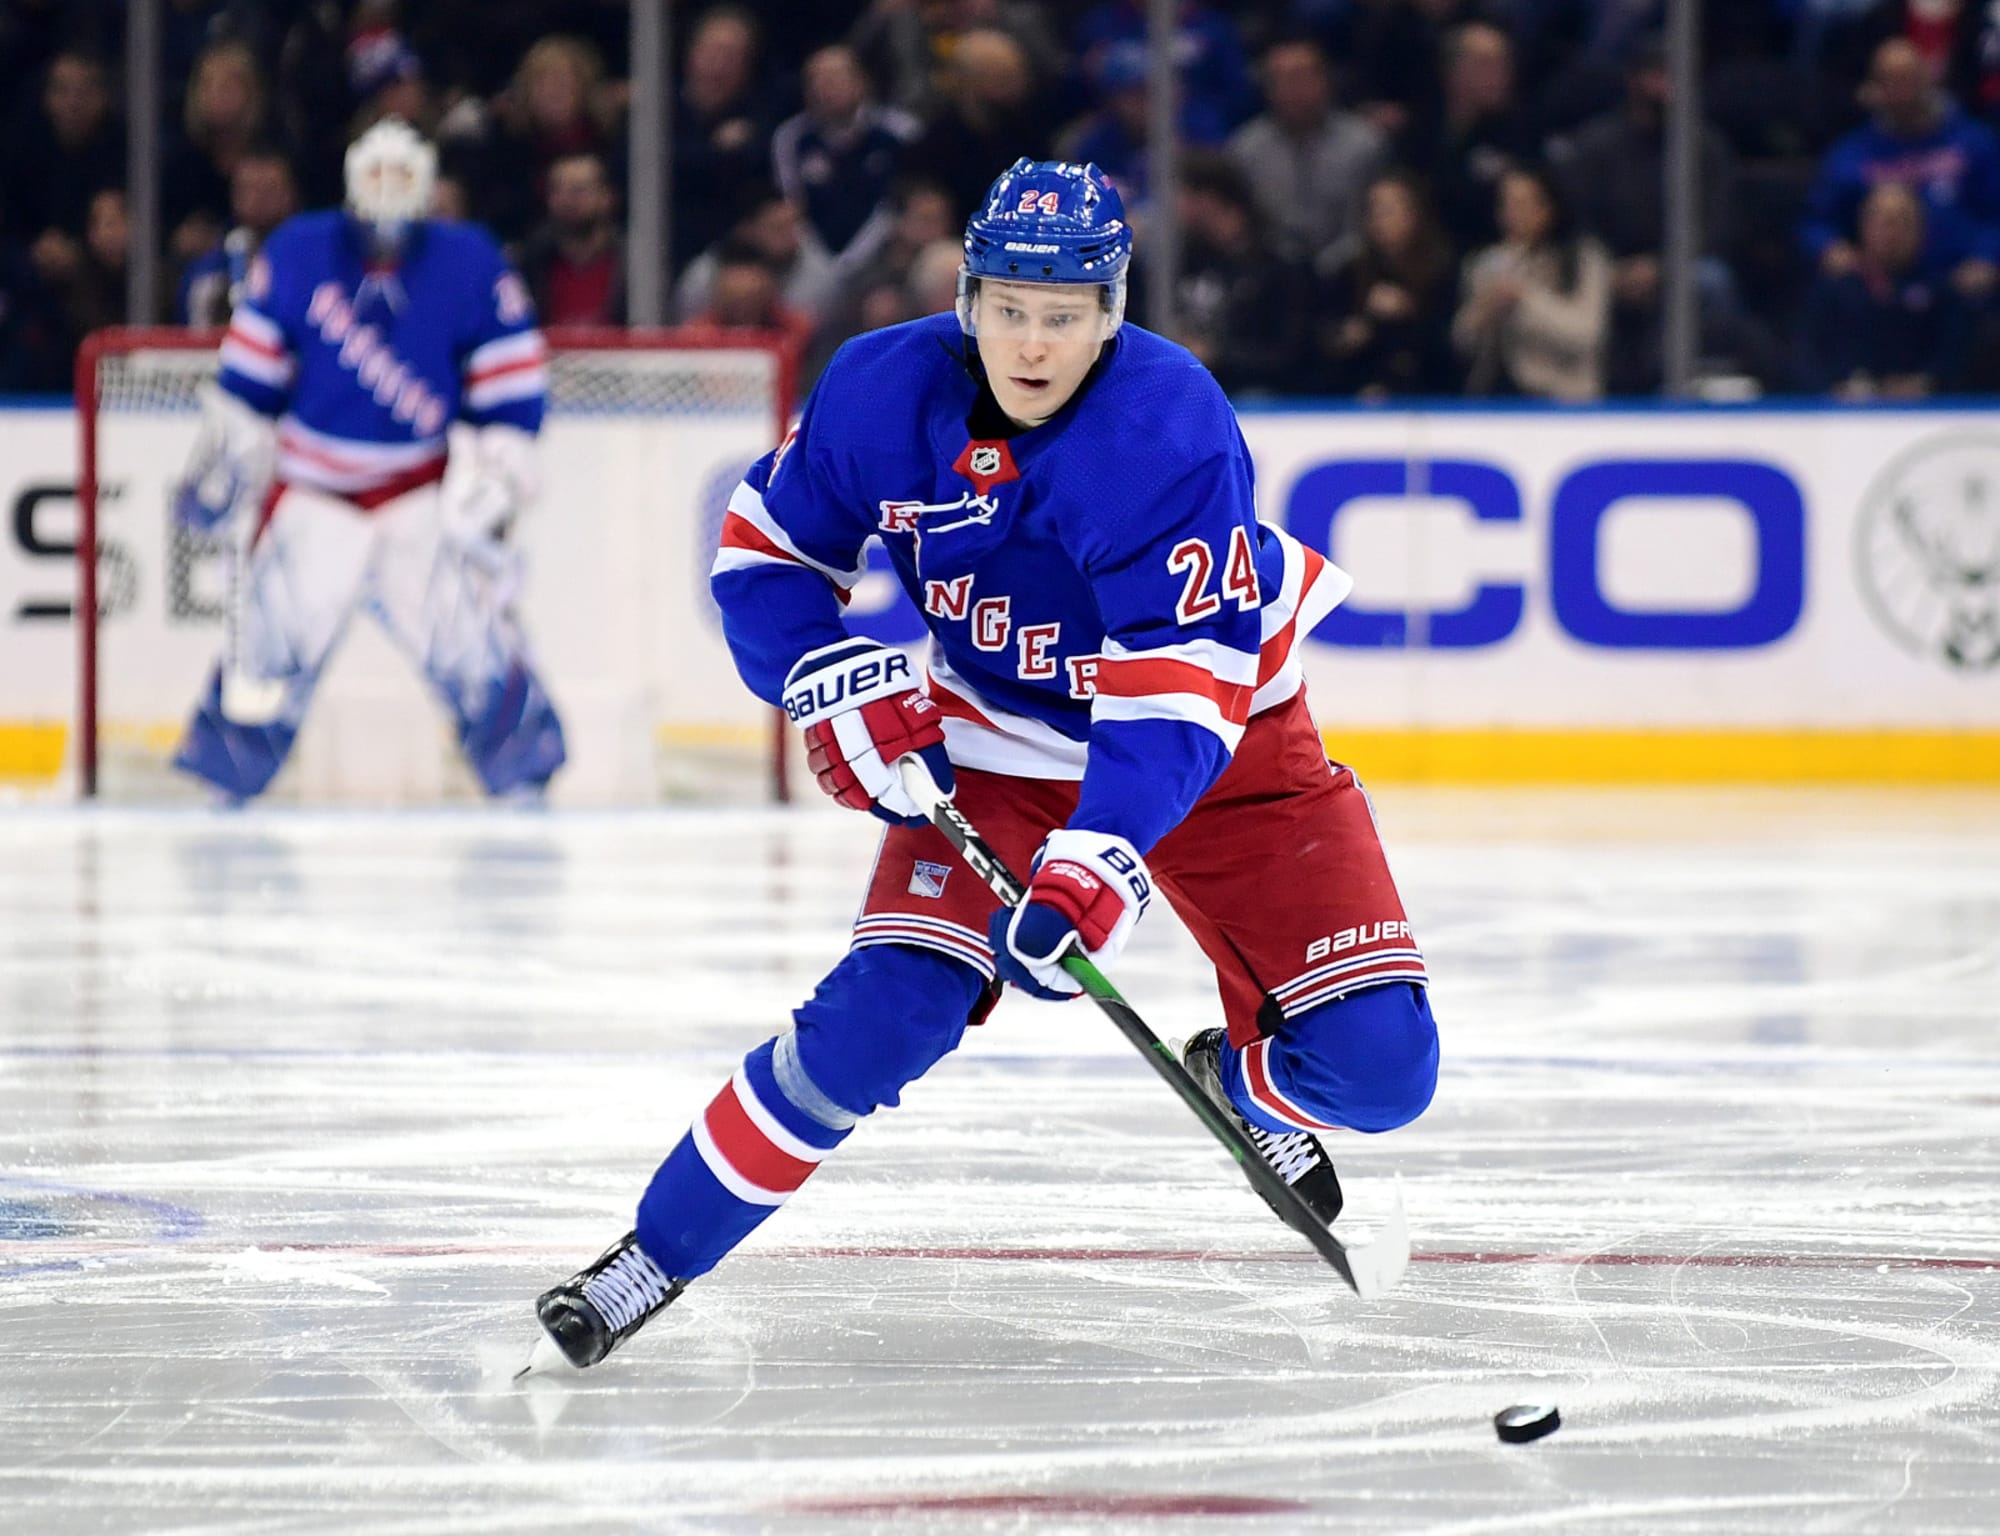 New York Rangers Vs Washington Capitals – NHL Game Day PREVIEW: 02.20.2021